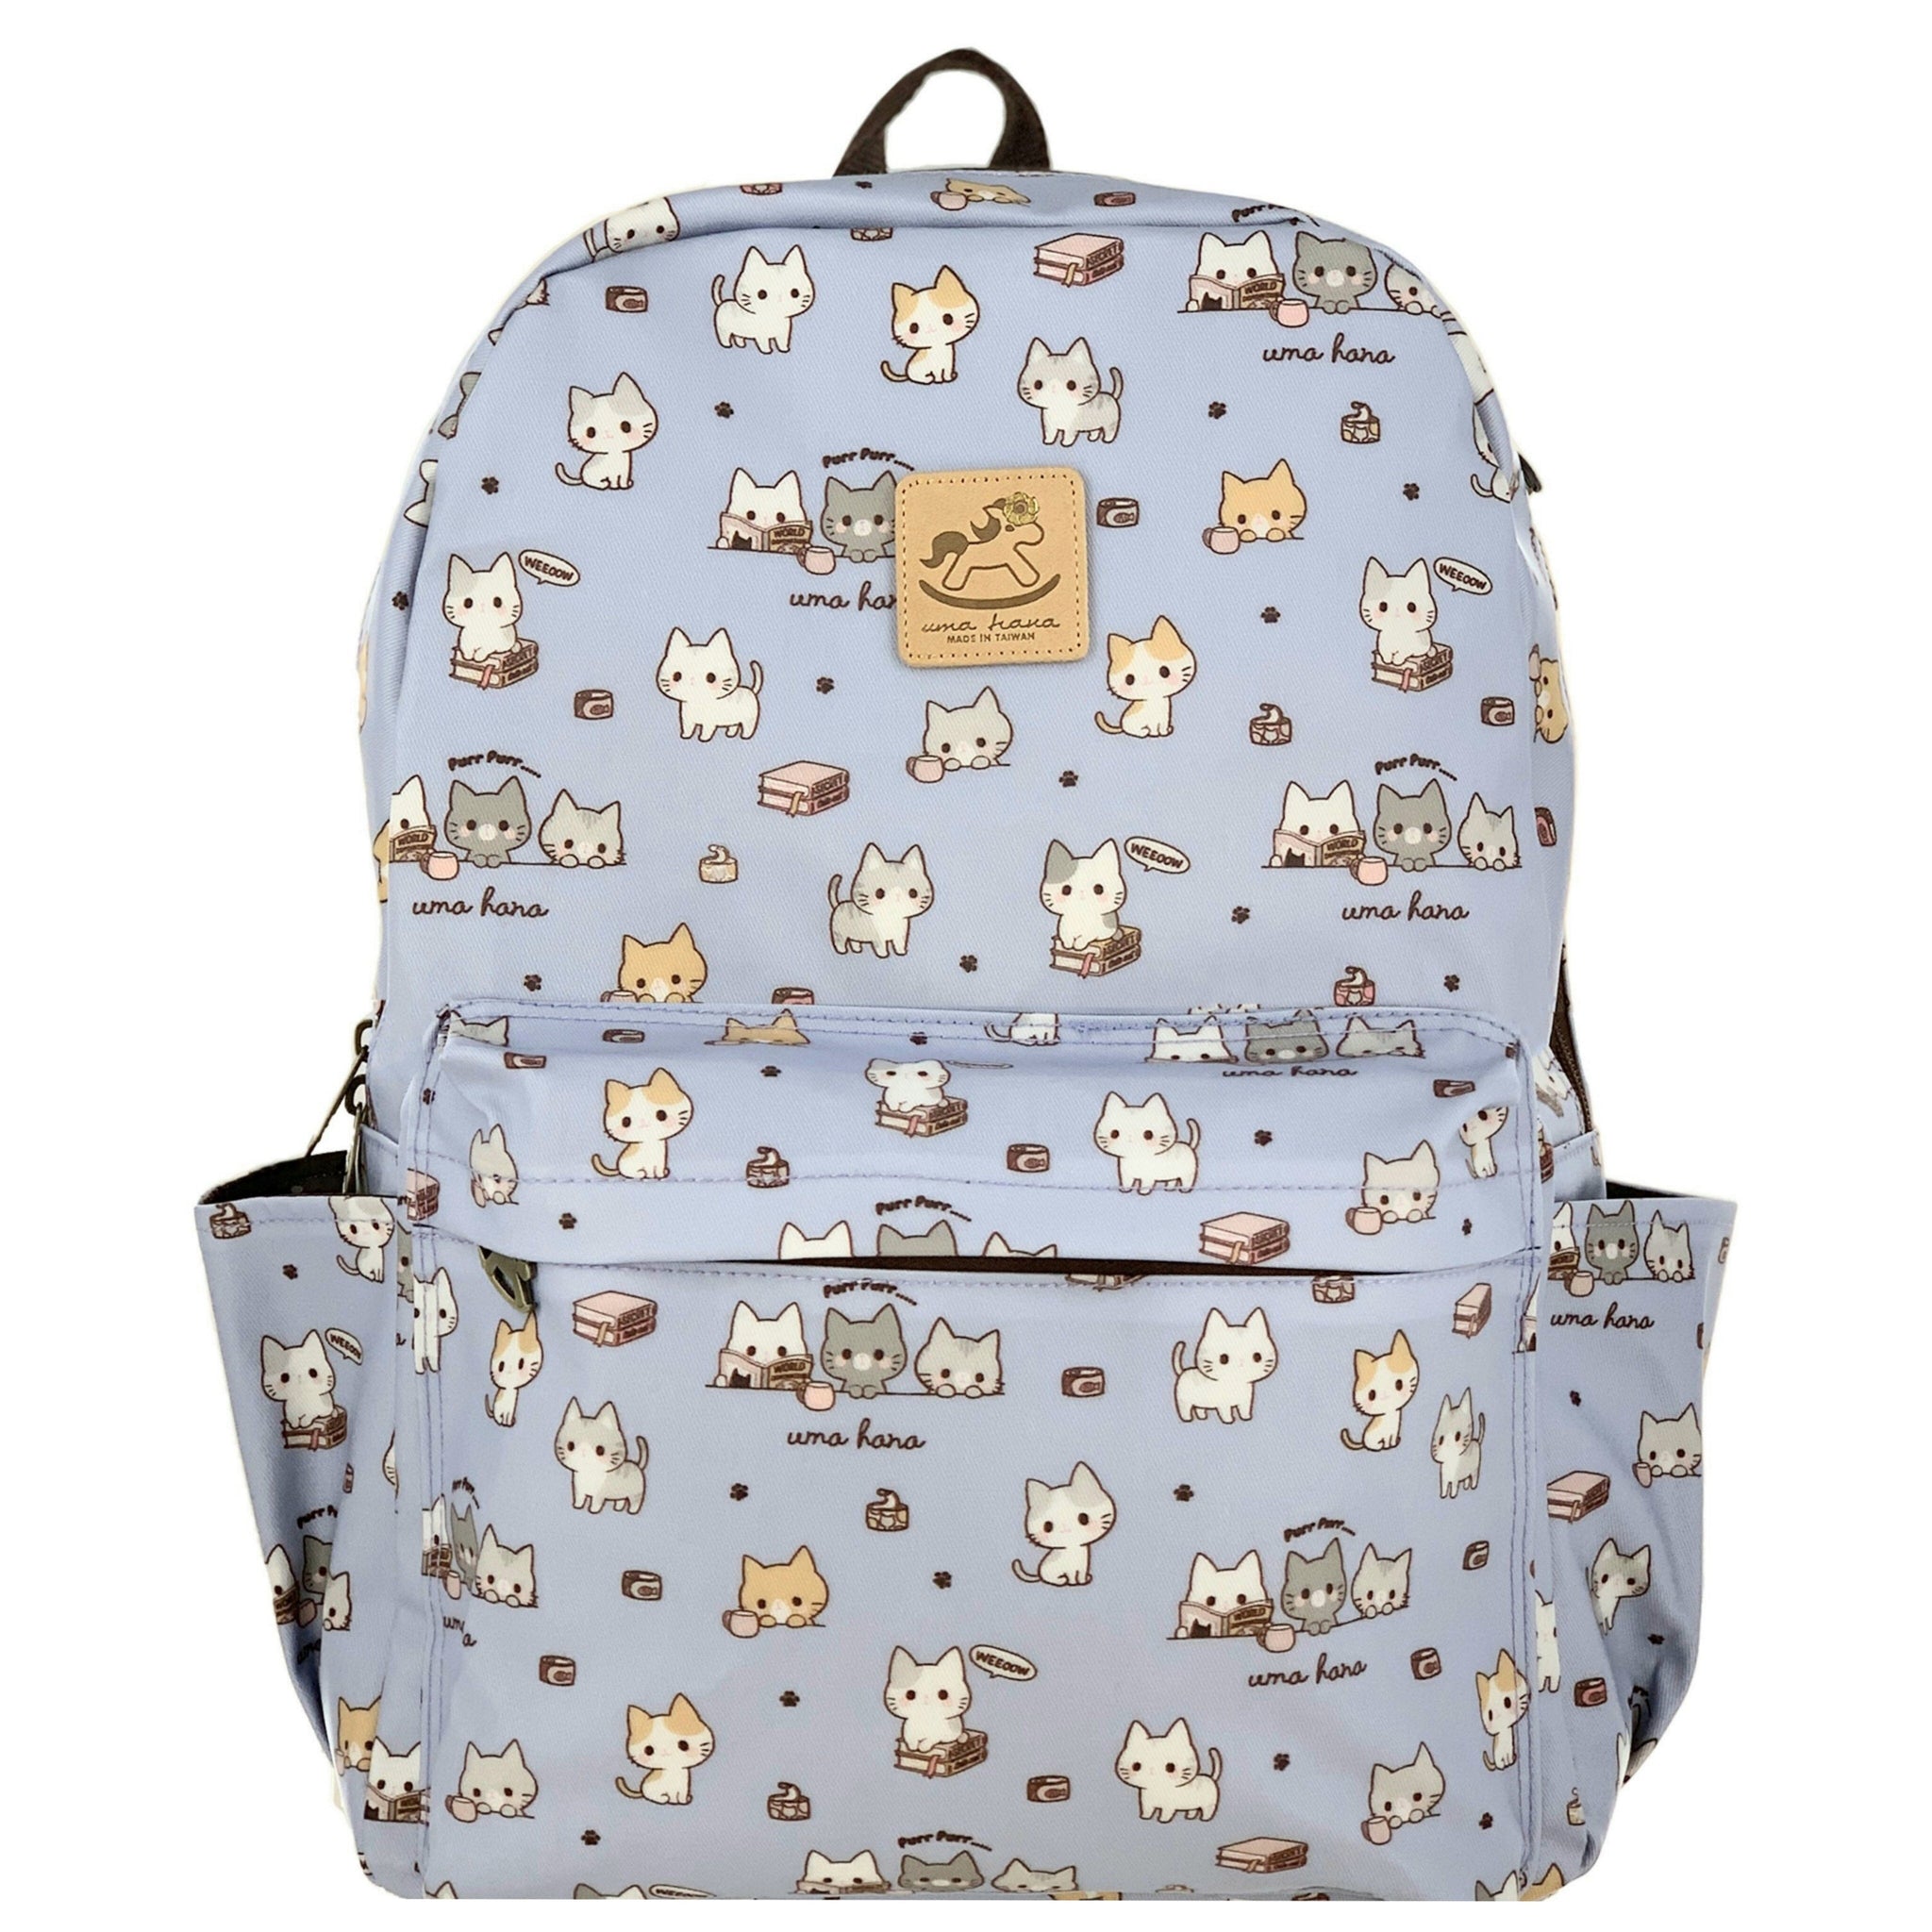 Periwinkle Blue Meow Cat Large Backpack